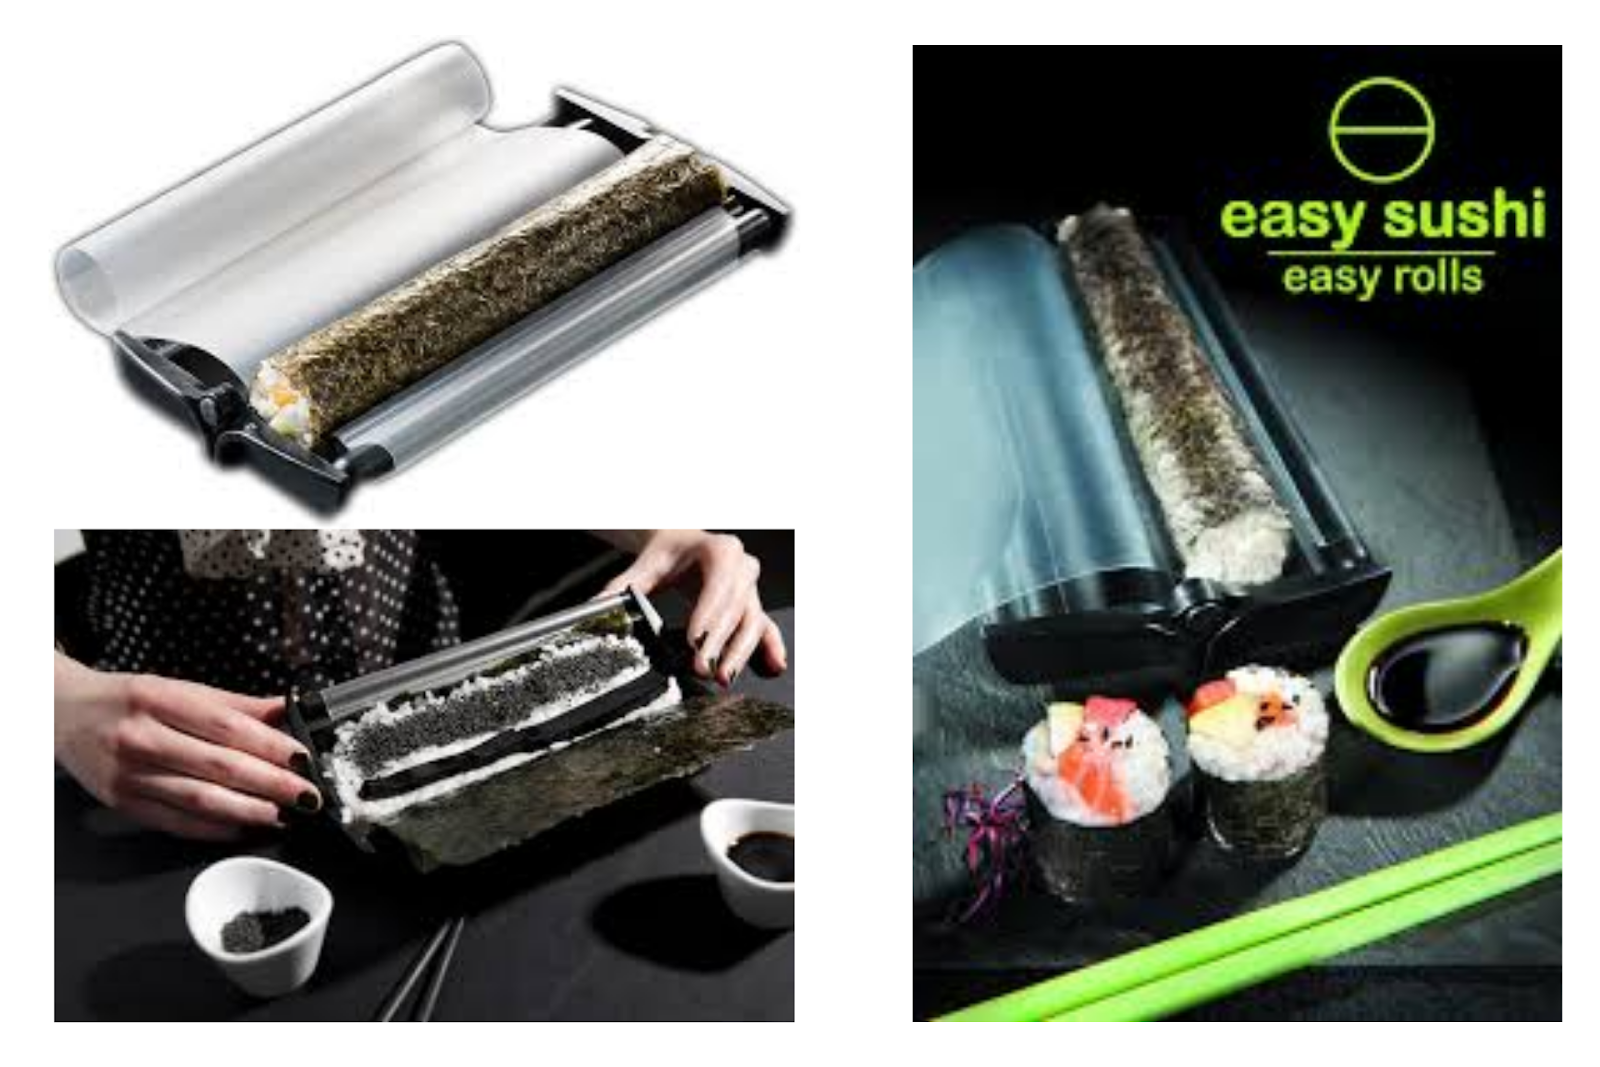 An easy sushi roller